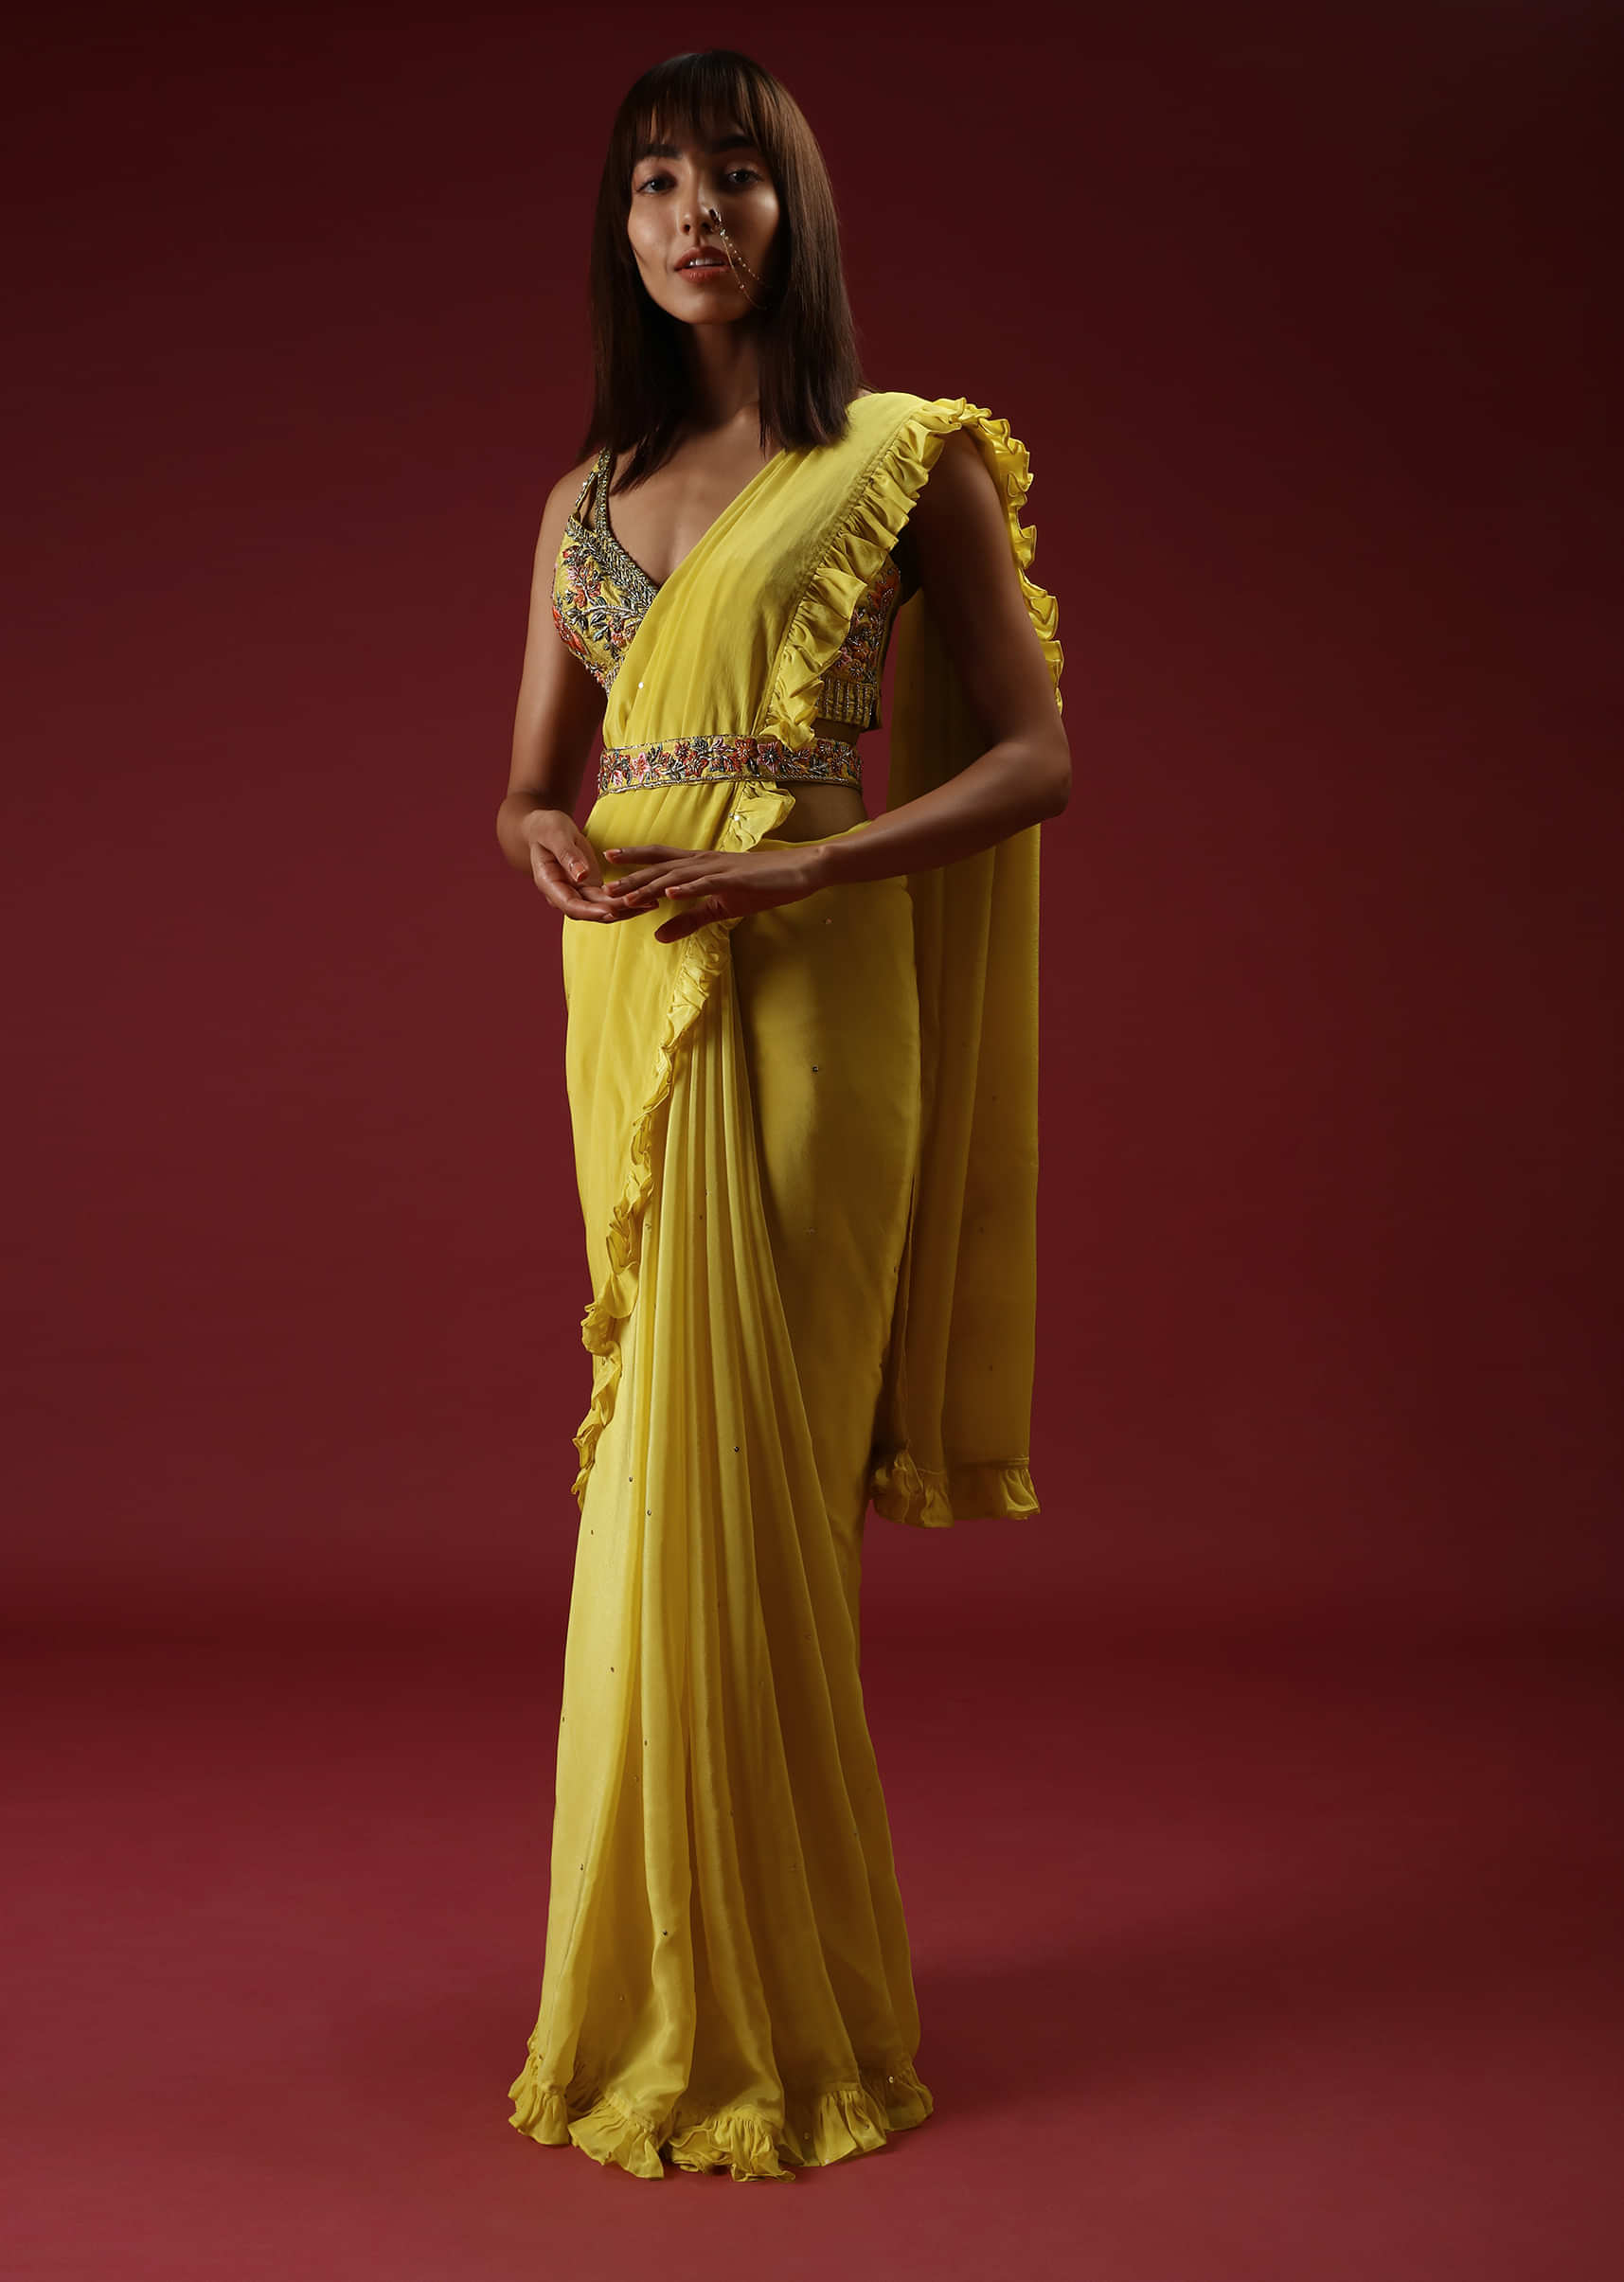 Lemon Yellow Ruffle Saree And Multi Colored Hand Embroidered Crop Top With Plunging Neckline And Belt